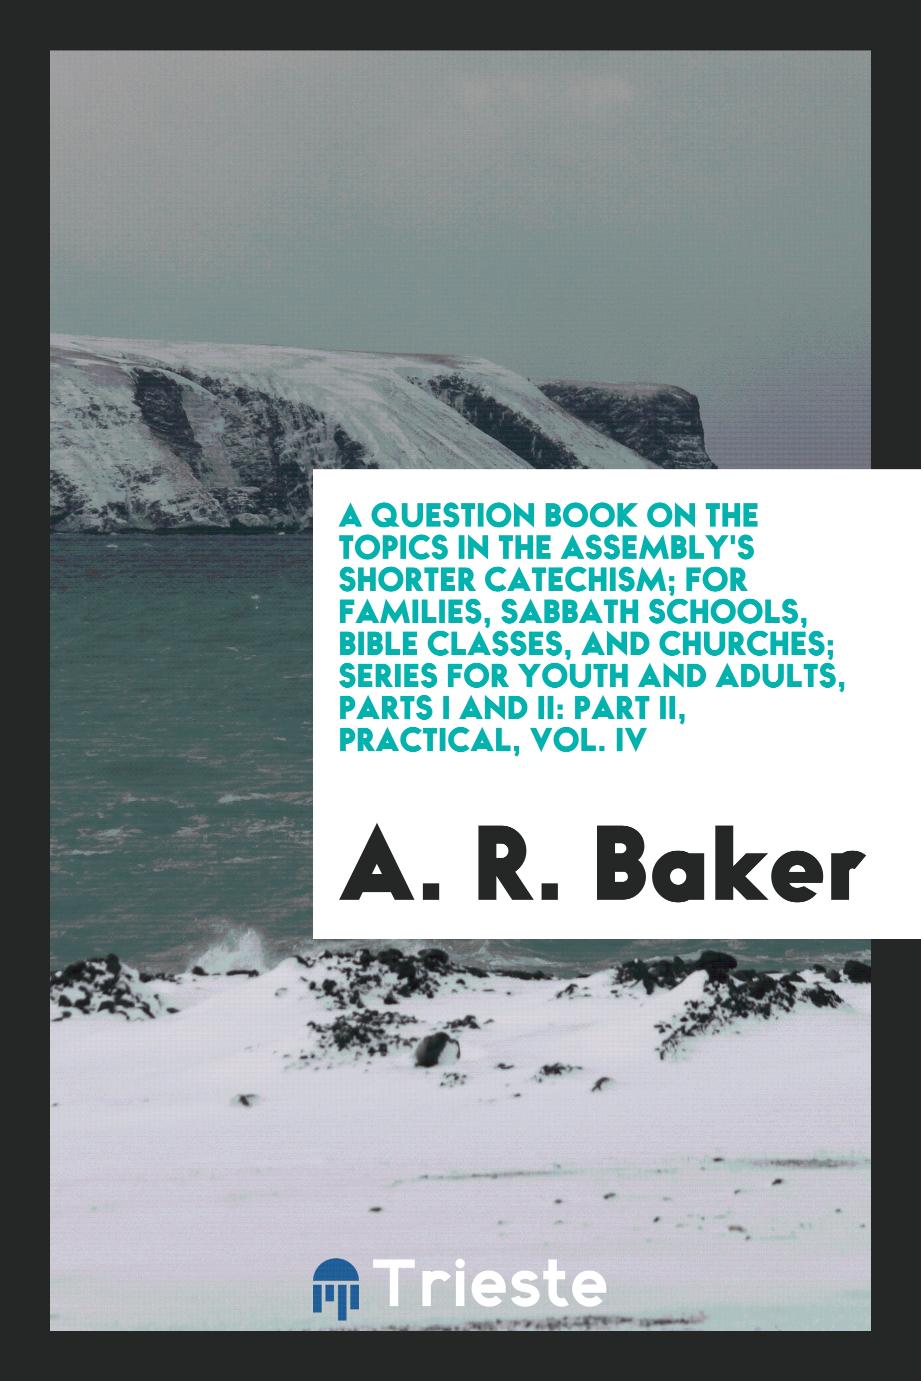 A Question Book on the Topics in the Assembly's Shorter Catechism; For Families, Sabbath Schools, Bible Classes, and Churches; Series for Youth and Adults, Parts I and II: Part II, Practical, Vol. IV